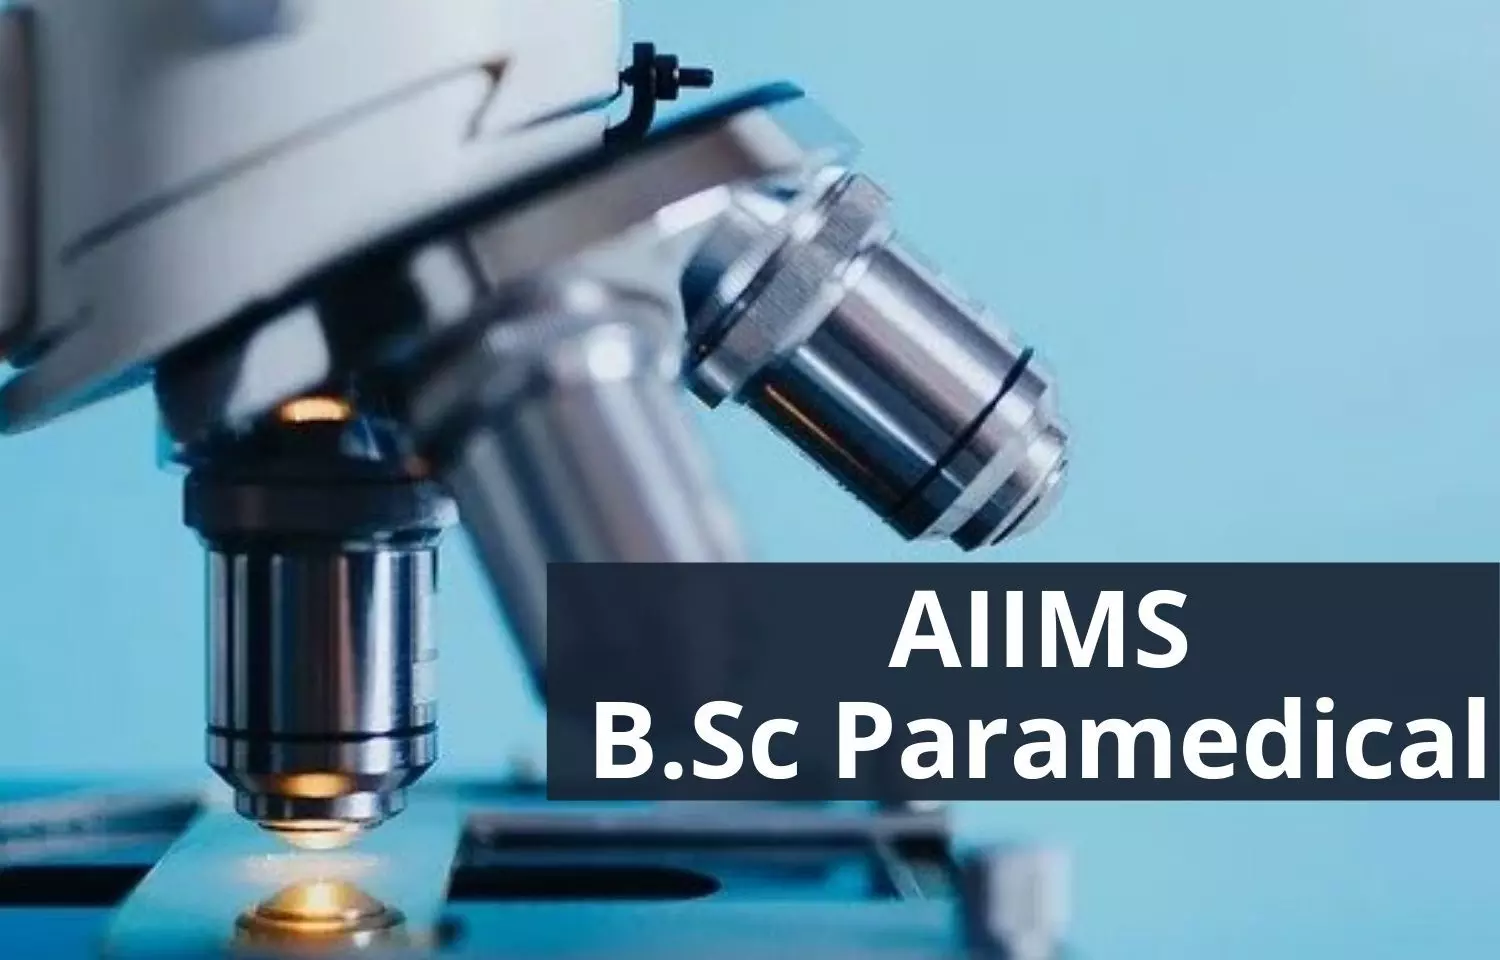 AIIMS publishes List Of Eligible Candidates For Round 1 BSc Paramedical Counselling, details